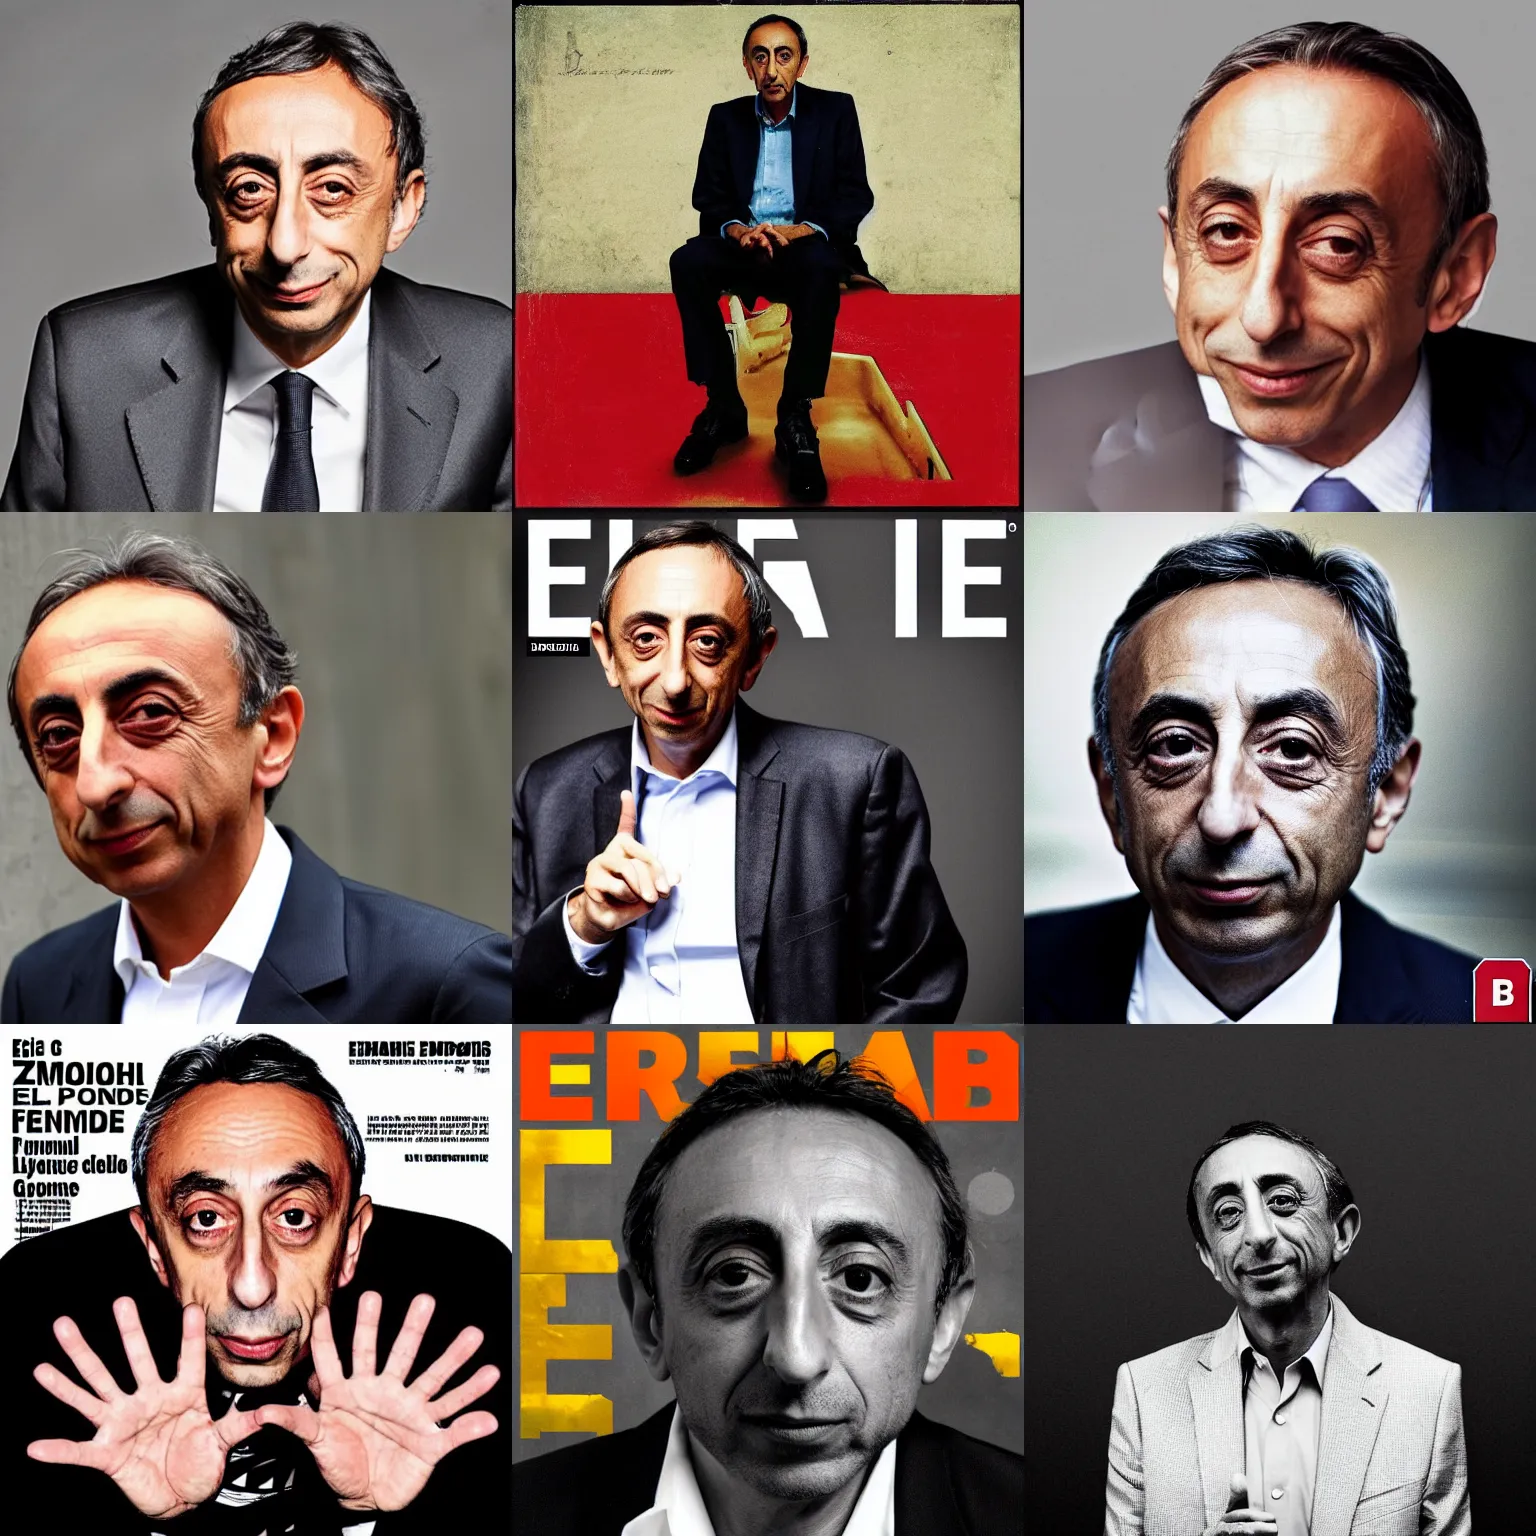 Prompt: eric zemmour on the cover of a gangsta rap album, eric zemmour french politician, album cover